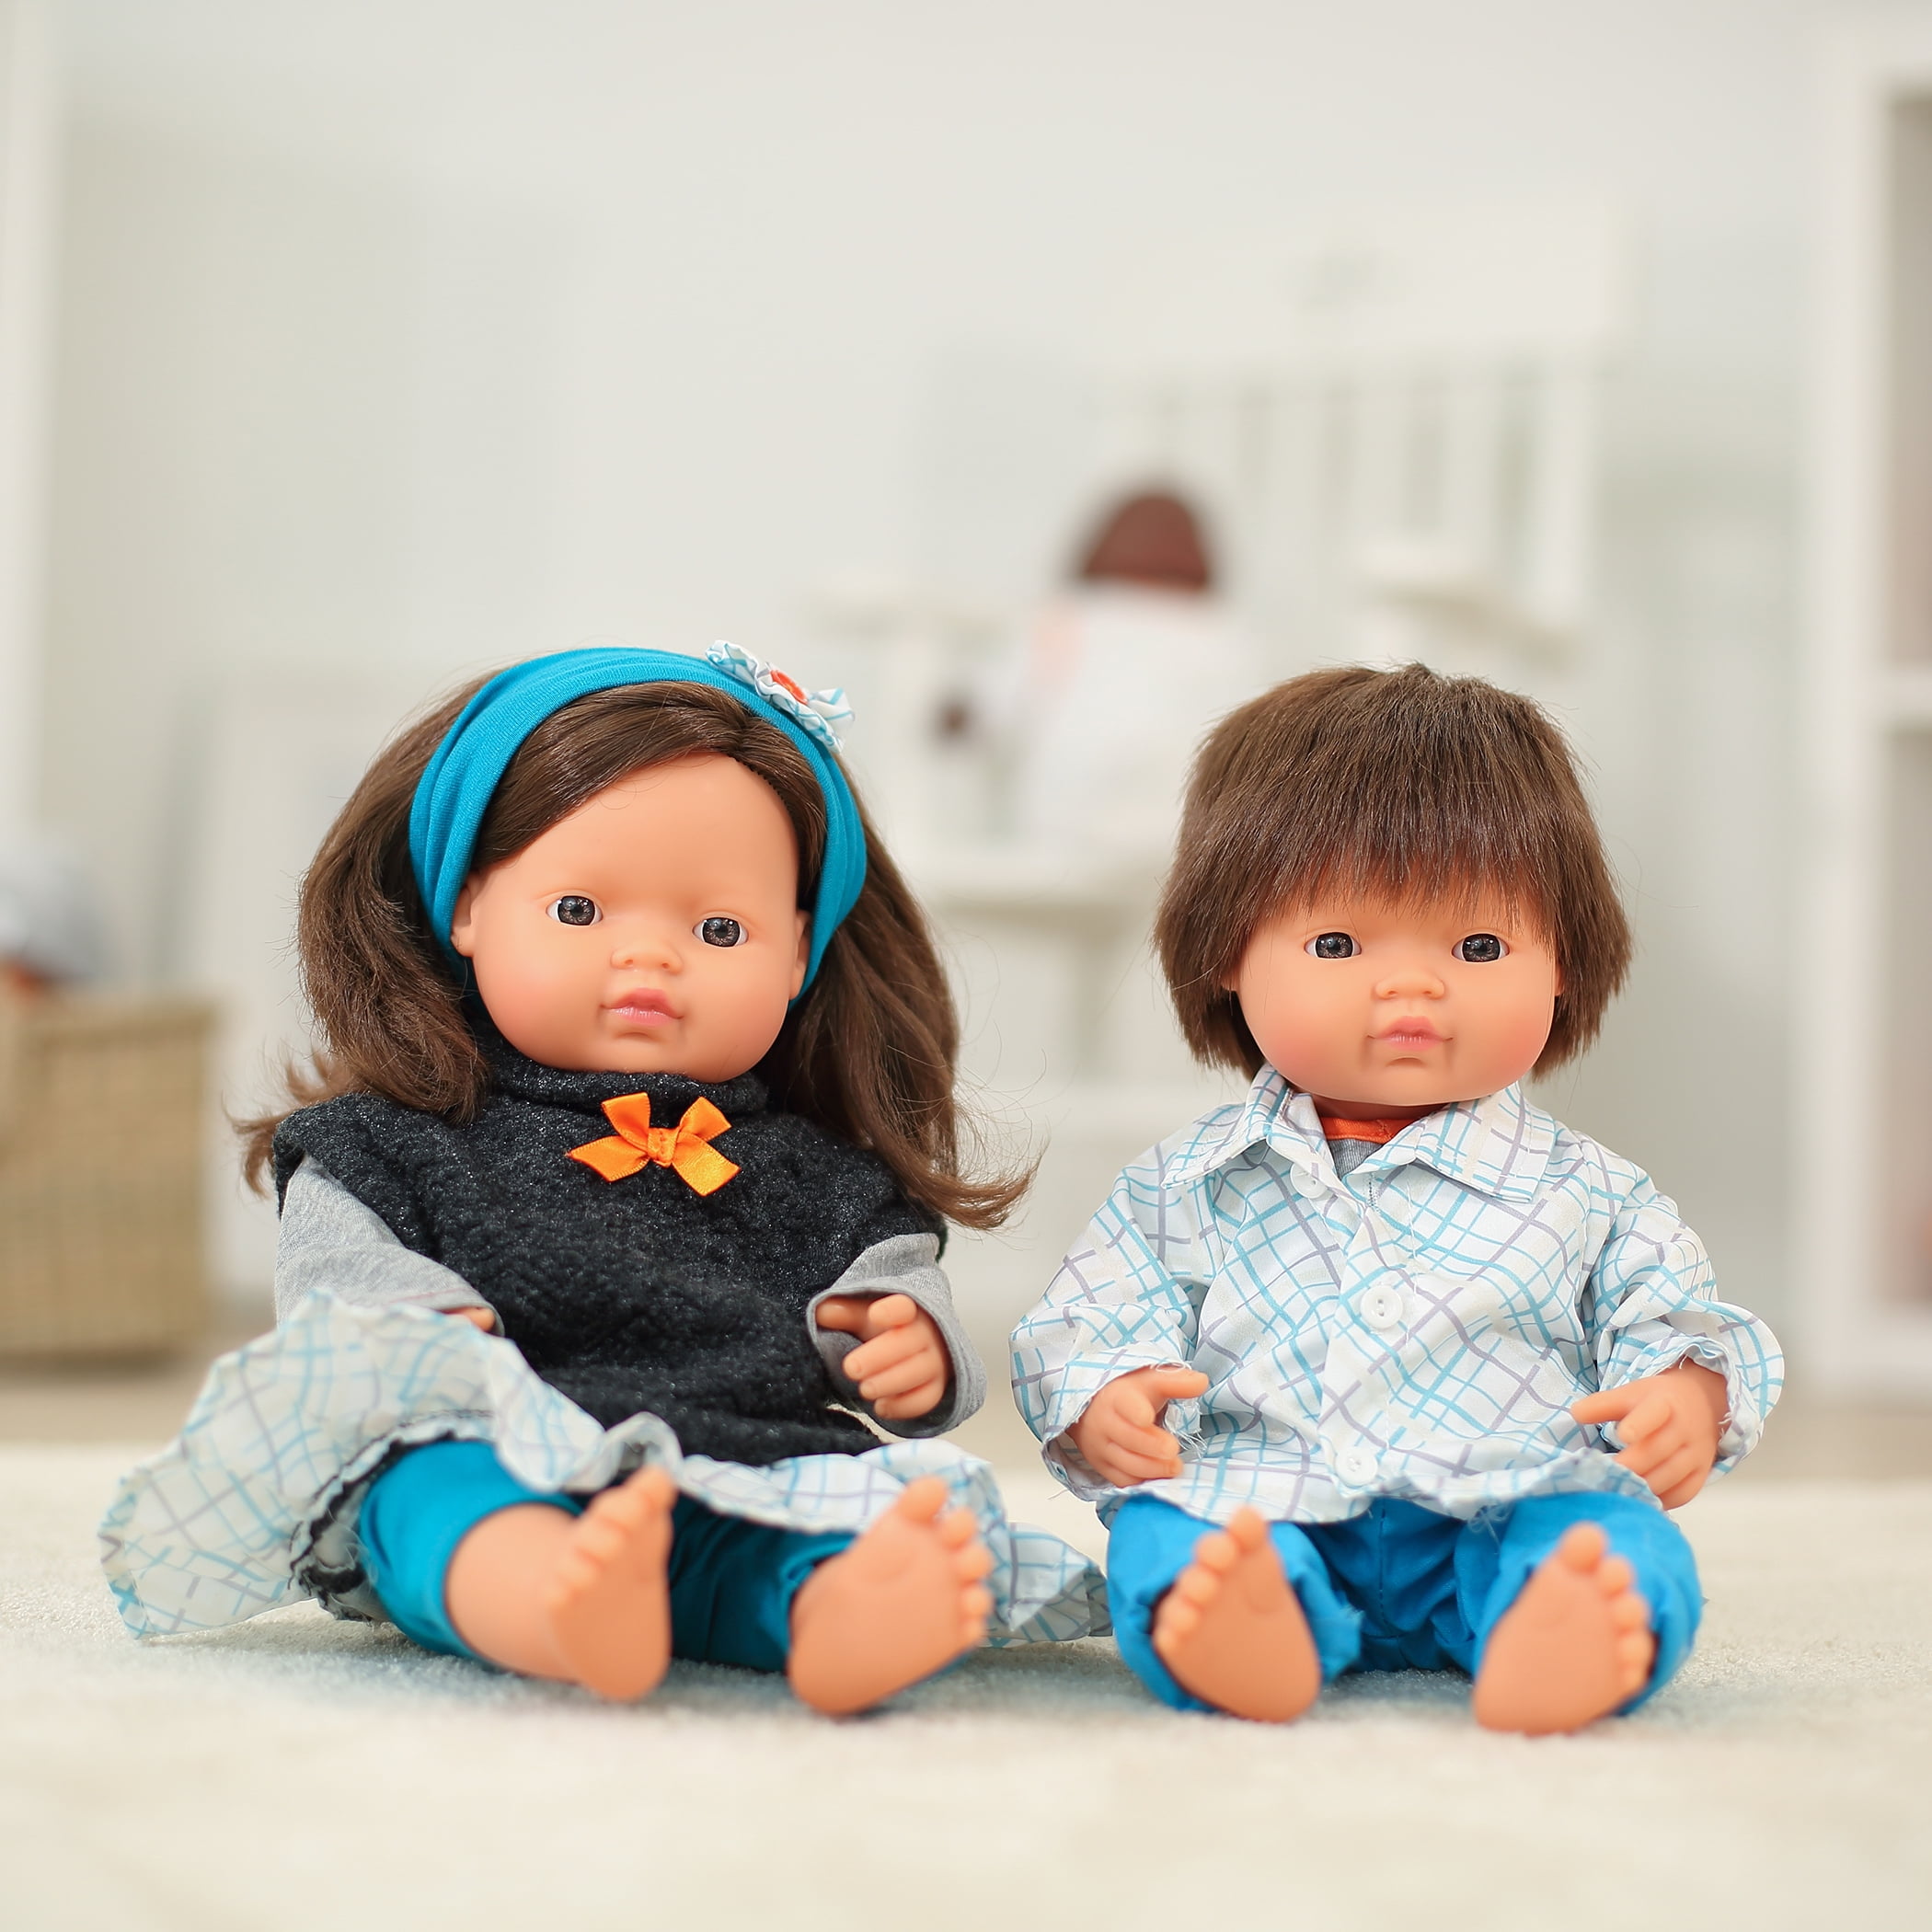 Miniland Baby Doll Caucasian - Mildred & Dildred